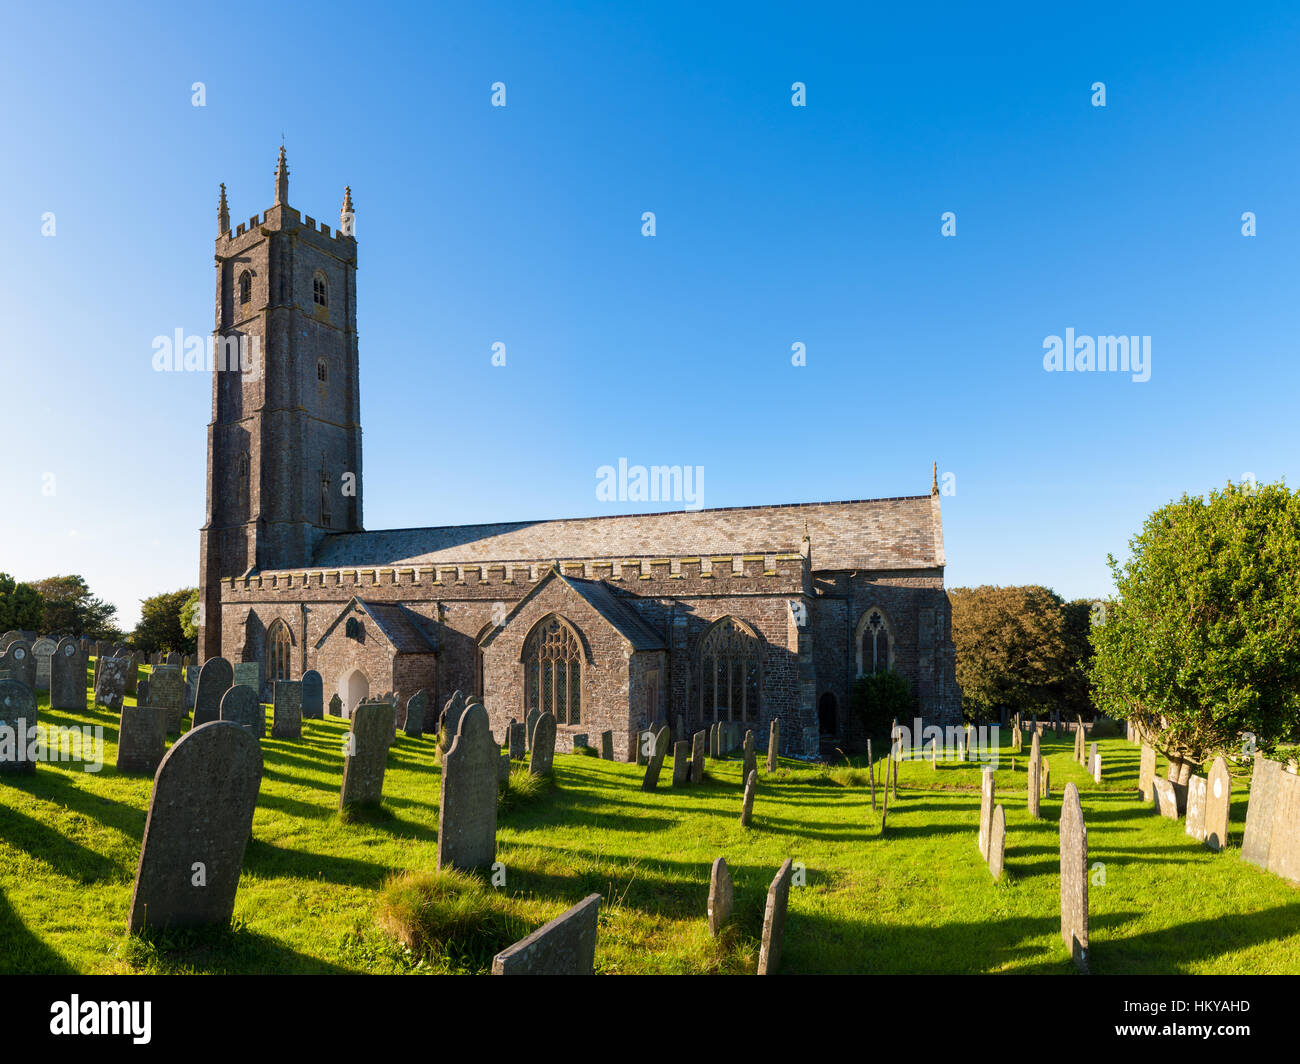 St Nectan's Church in the village of Stoke in North Devon, England. Also known as the Cathedral of North Devon. Stock Photo